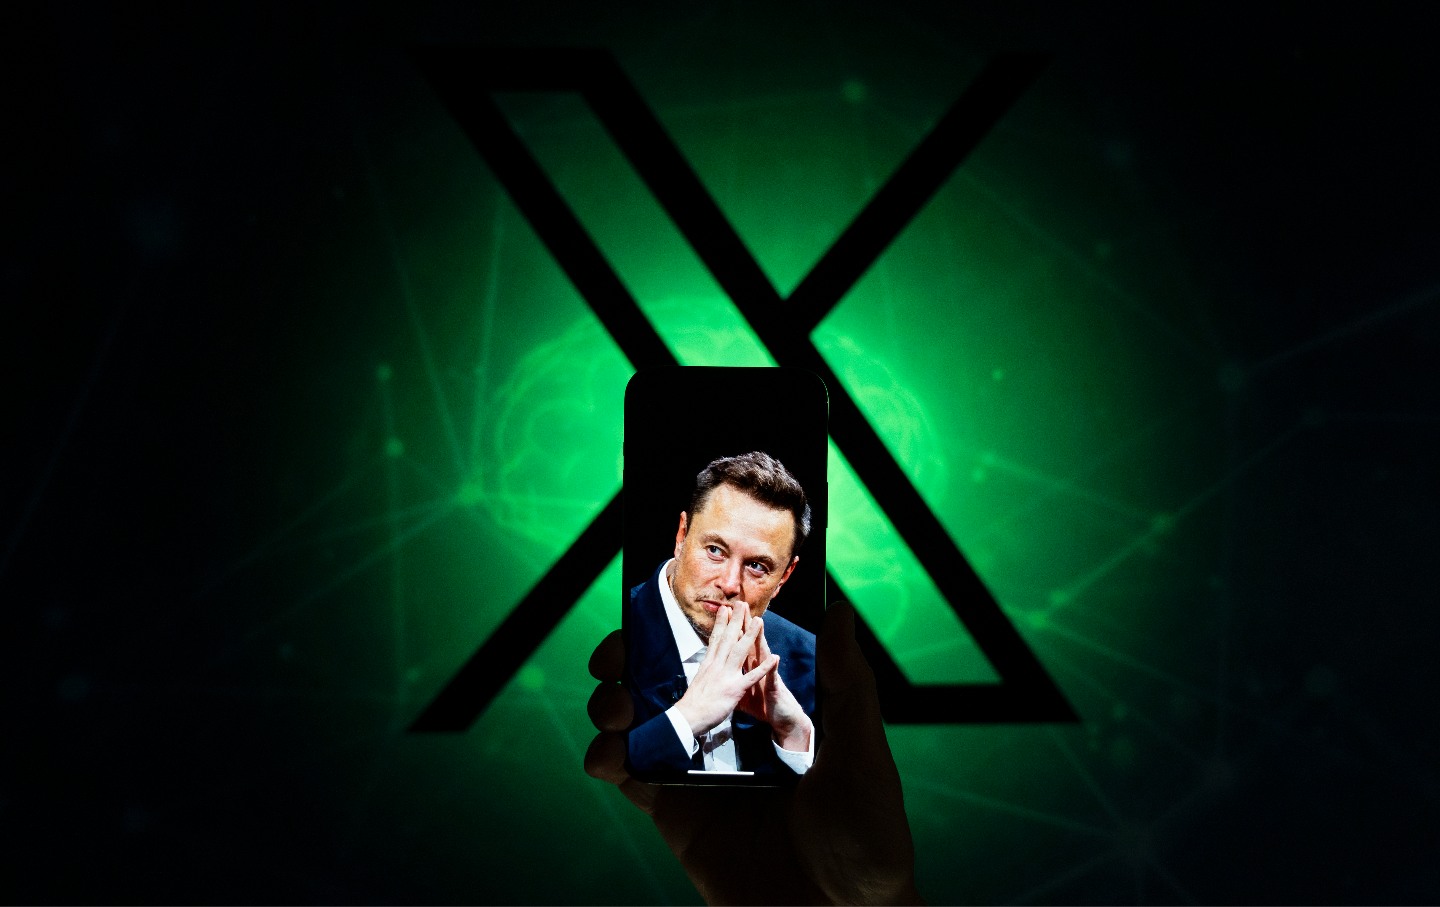 An effigy of Elon Musk is seen on the screen of a mobile device with the X logo in the background.